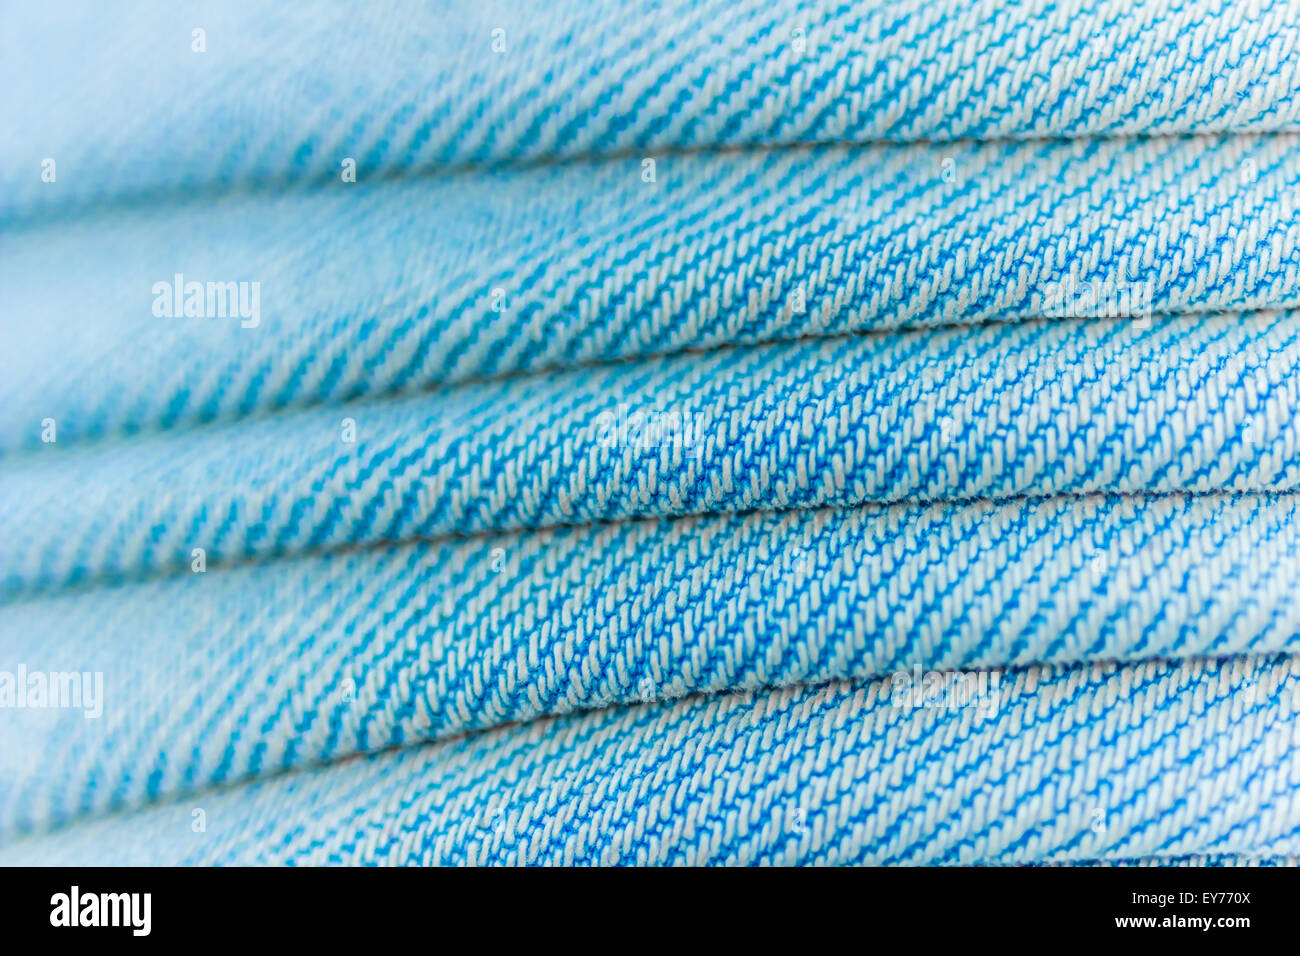 blue jeans texture. Focus in the center of the frame Stock Photo